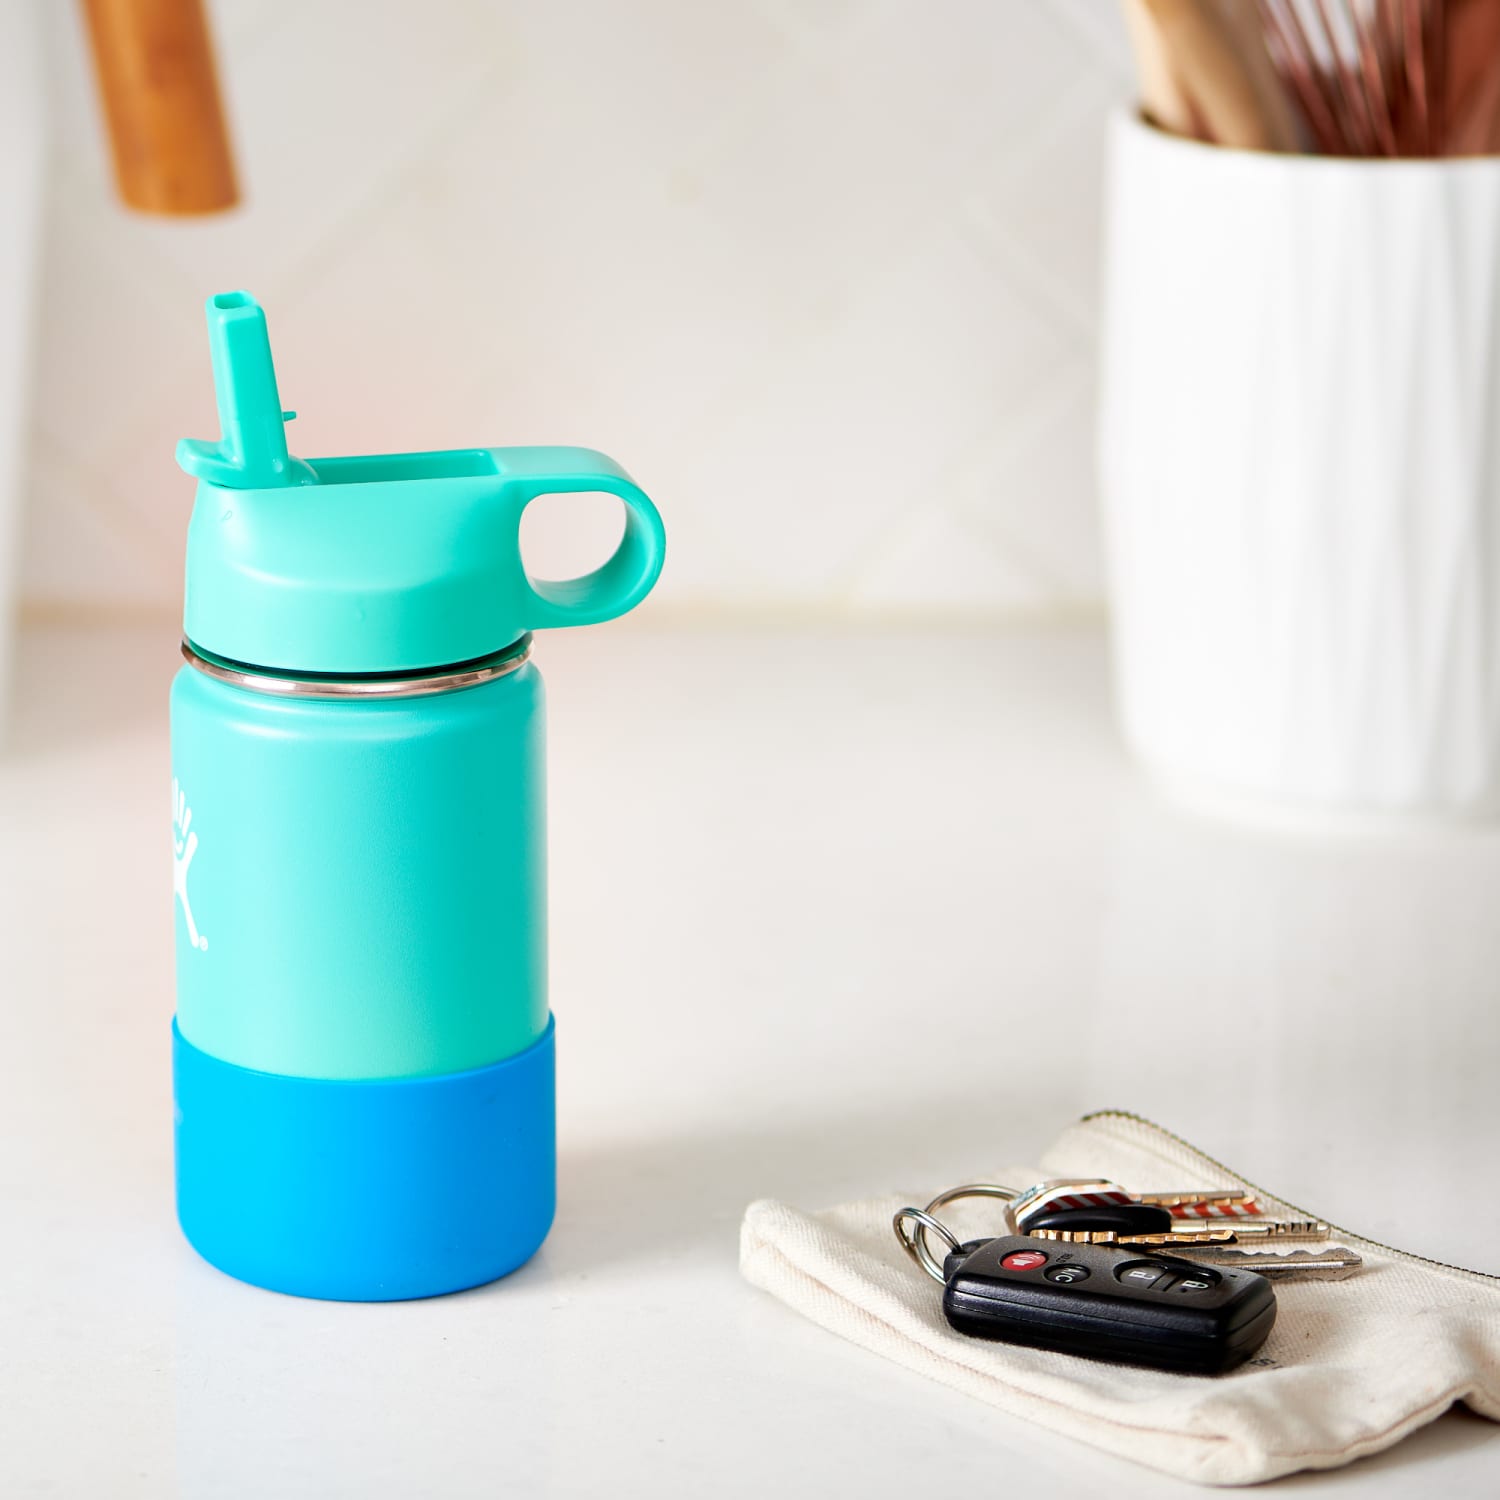 How To Clean A Reusable Water Bottle